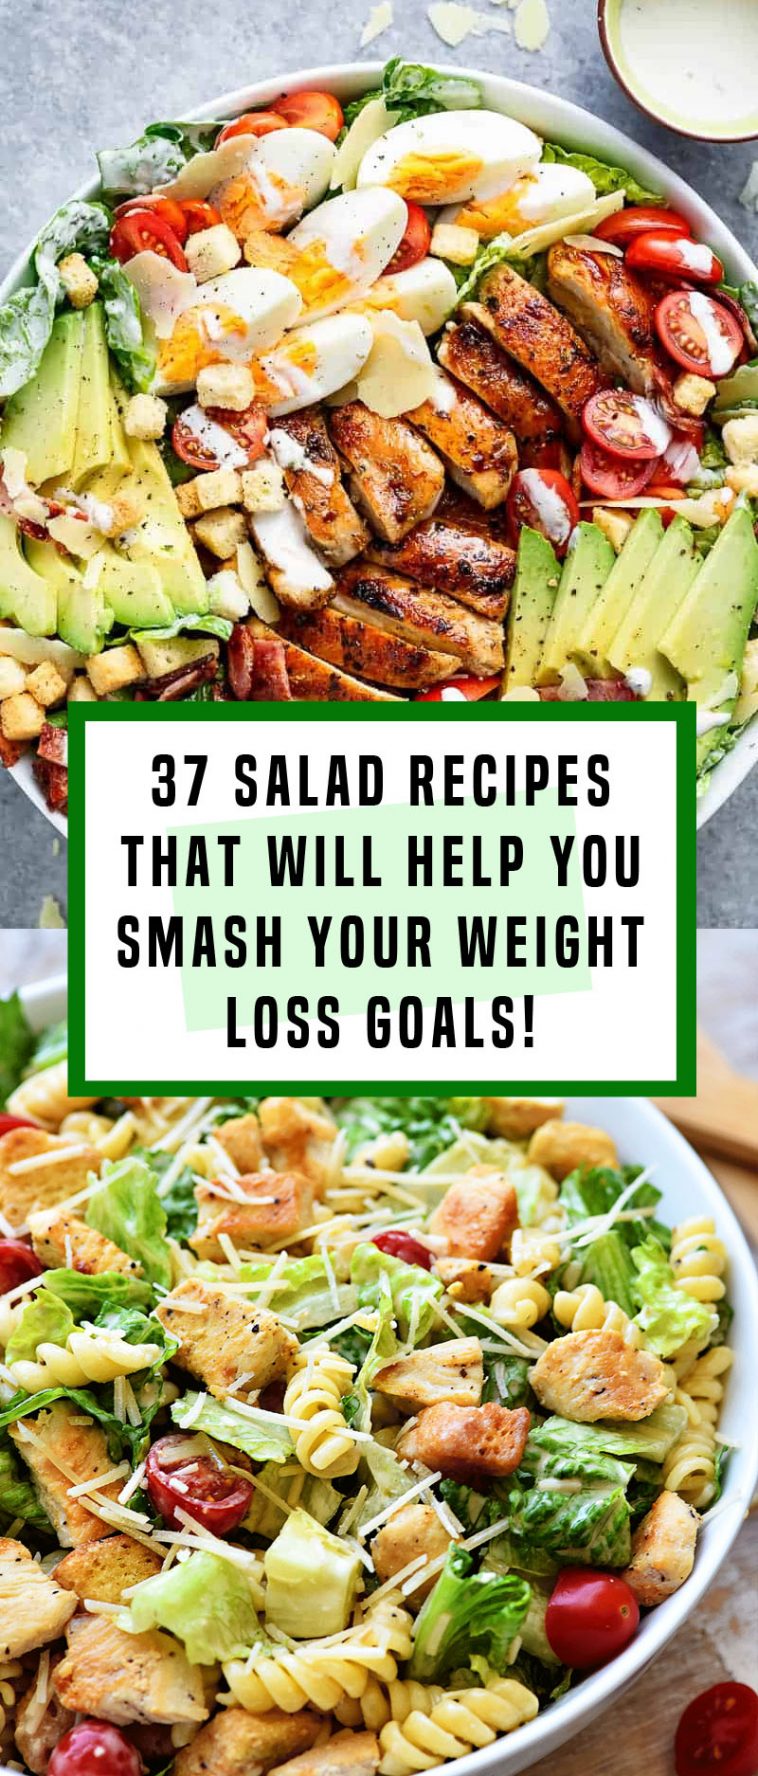 37 Salad Recipes That Will Help You Smash Your Weight Loss Goals